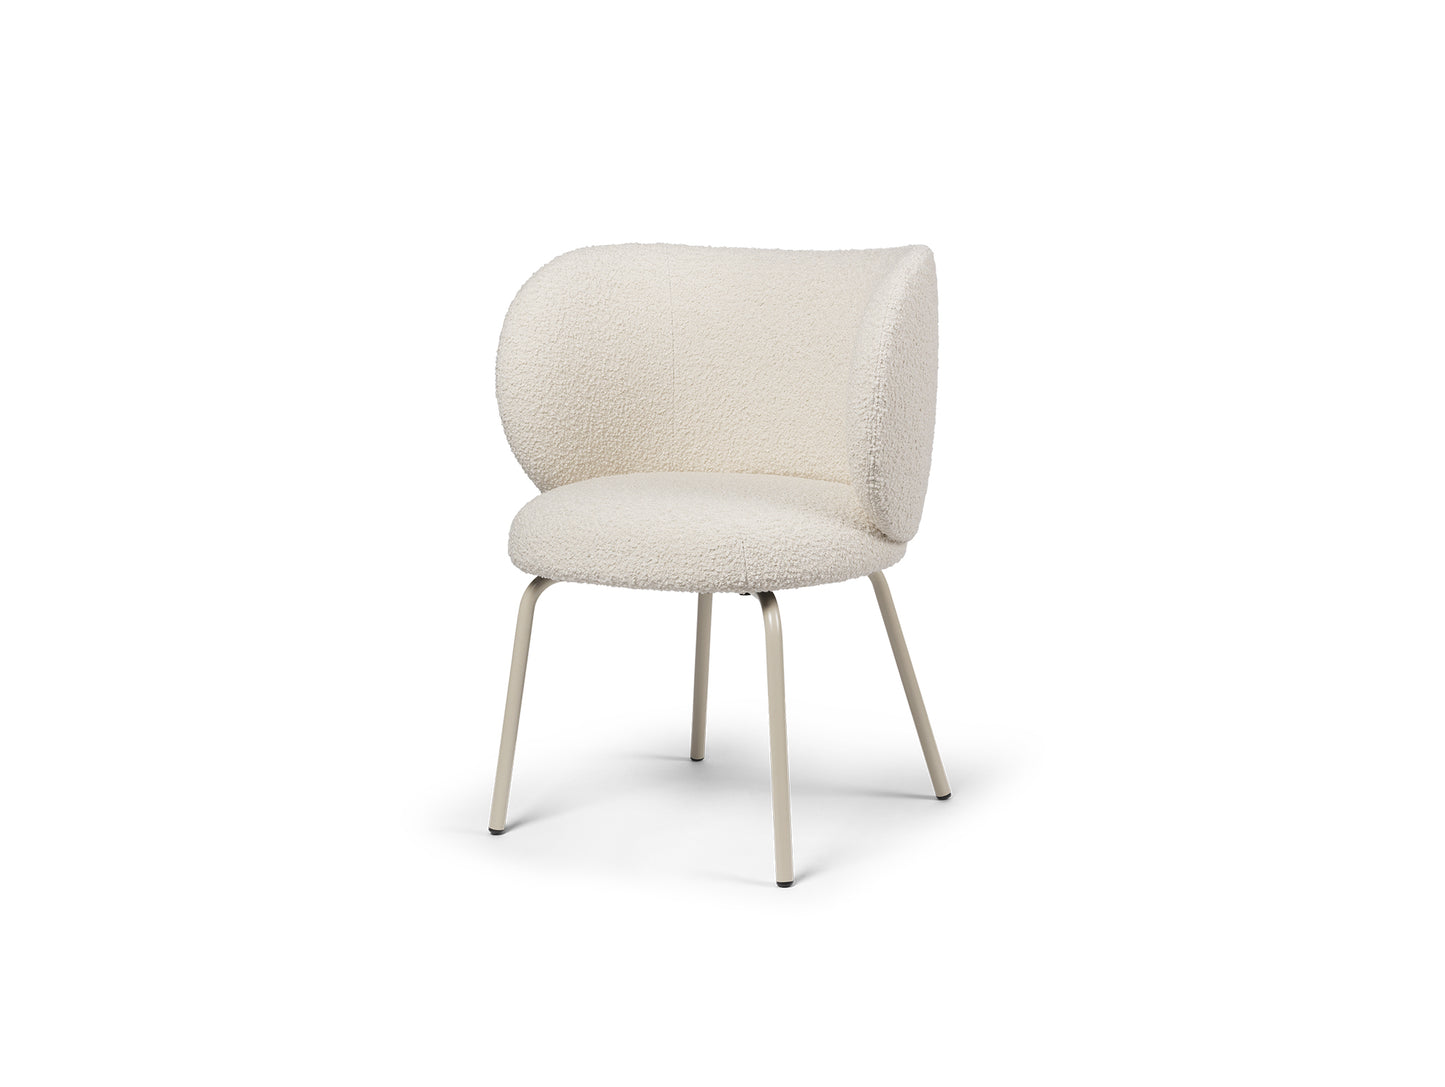 Rico Dining Chair - Fixed Base